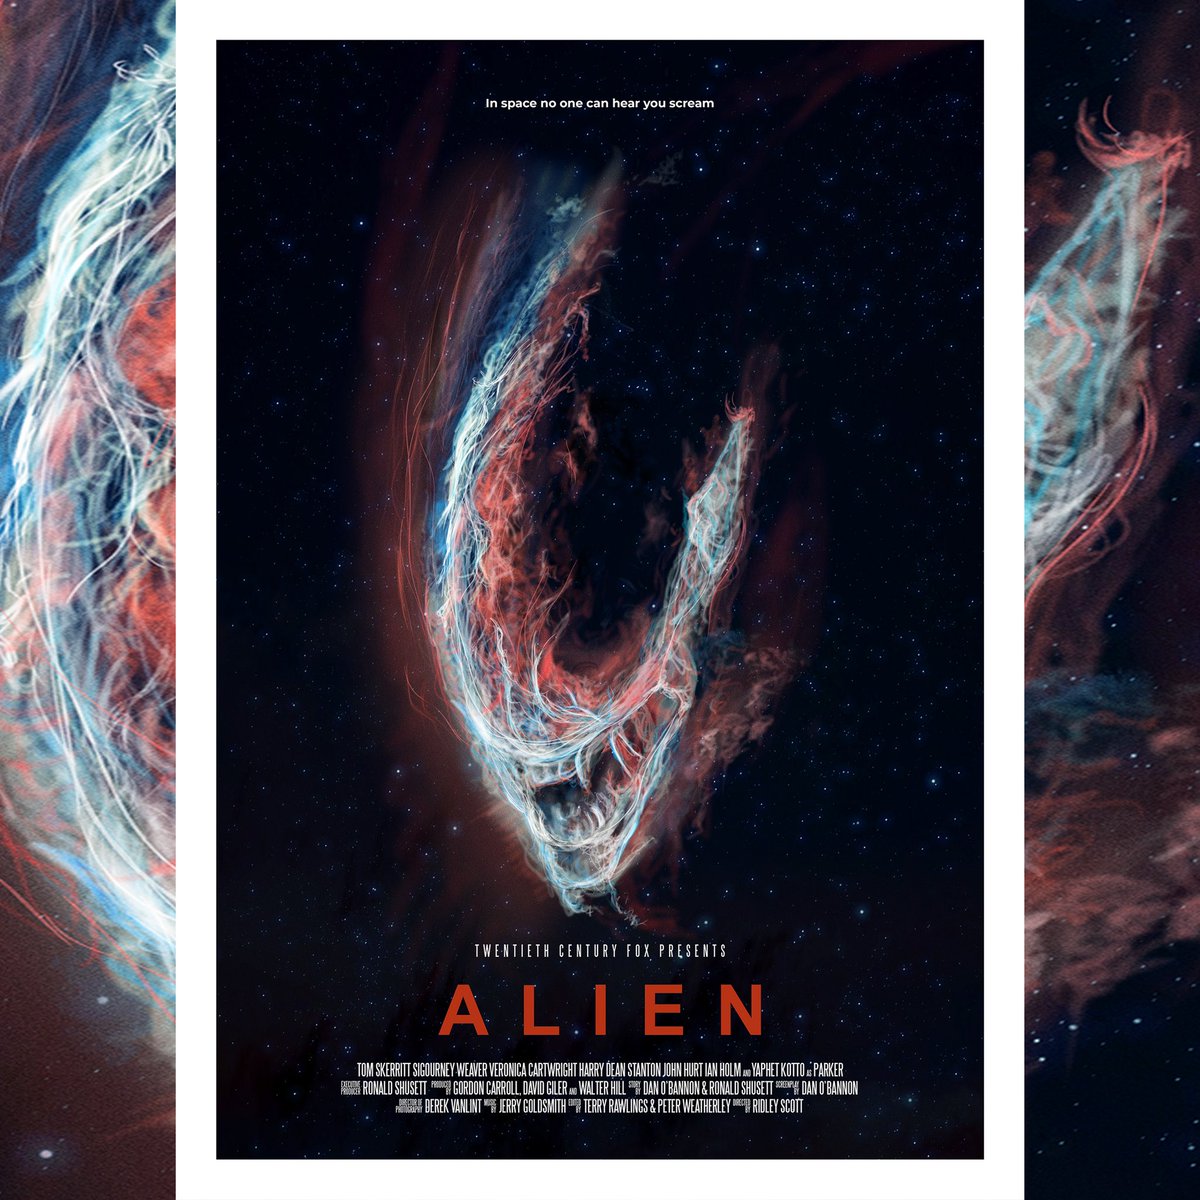 On sale now! Grab your limited edition Alien poster available in 2 sizes: A3 and A2 (150 of each size) philshellycreative.myshopify.com/collections/all #alien